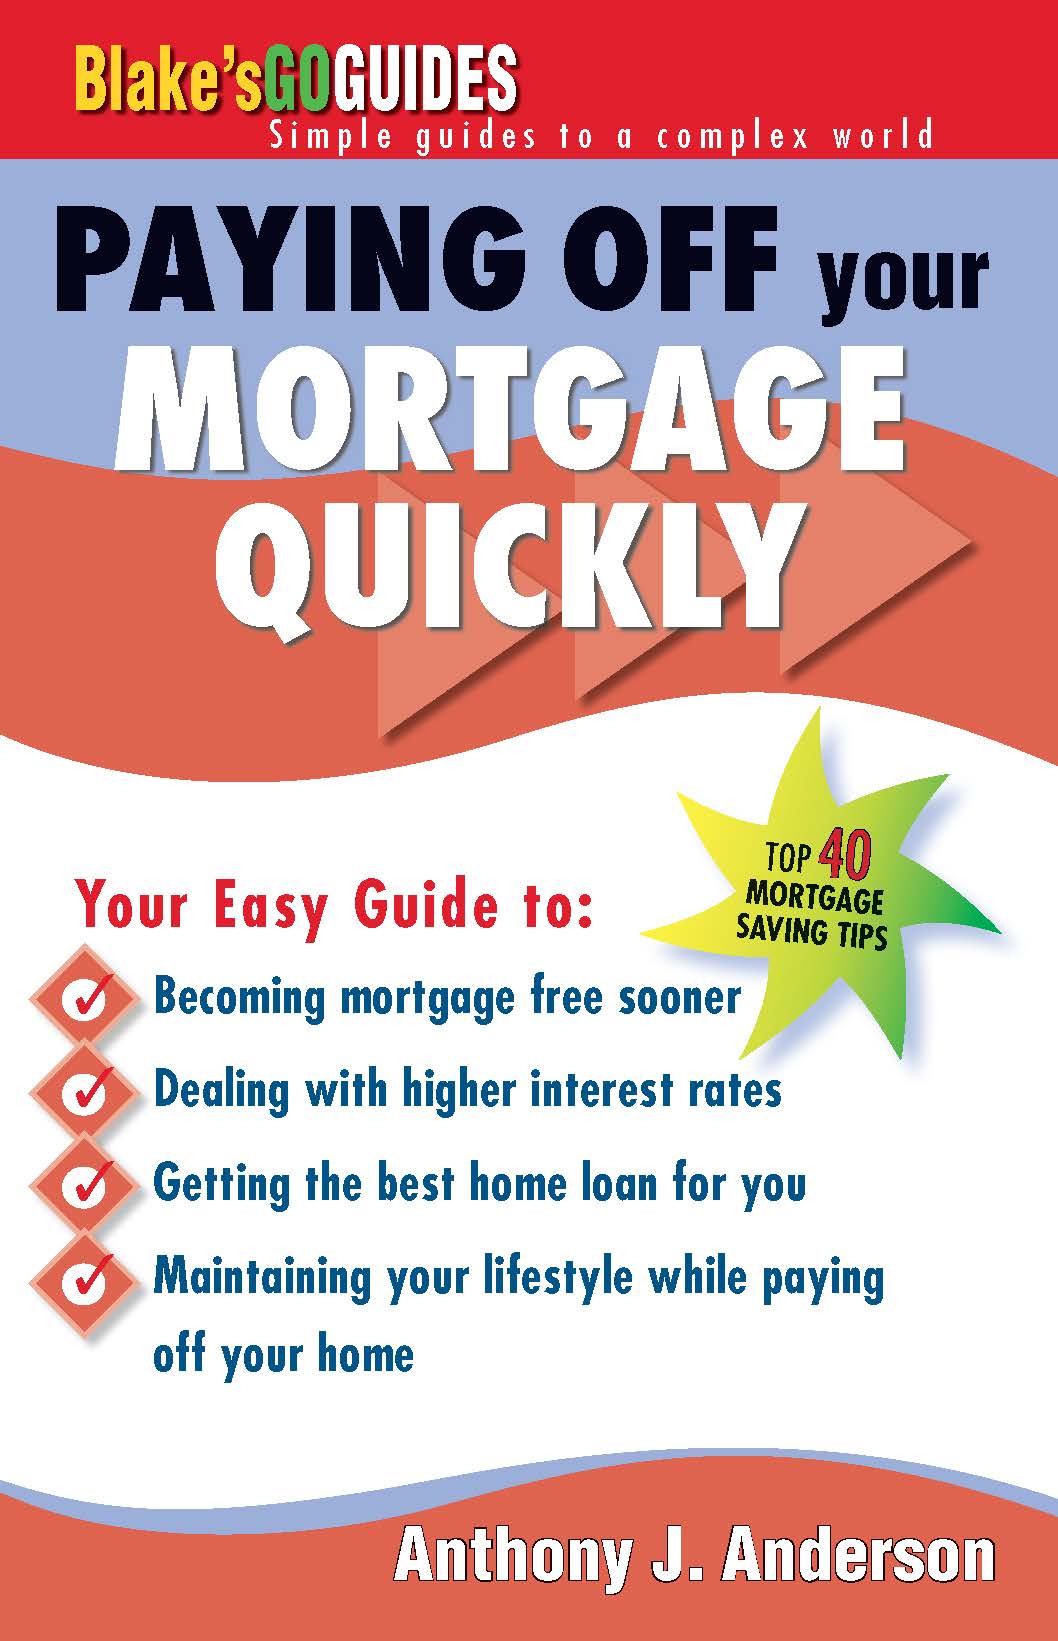 9781741251401-paying-off-your-mortgage-quickly-fc.jpg